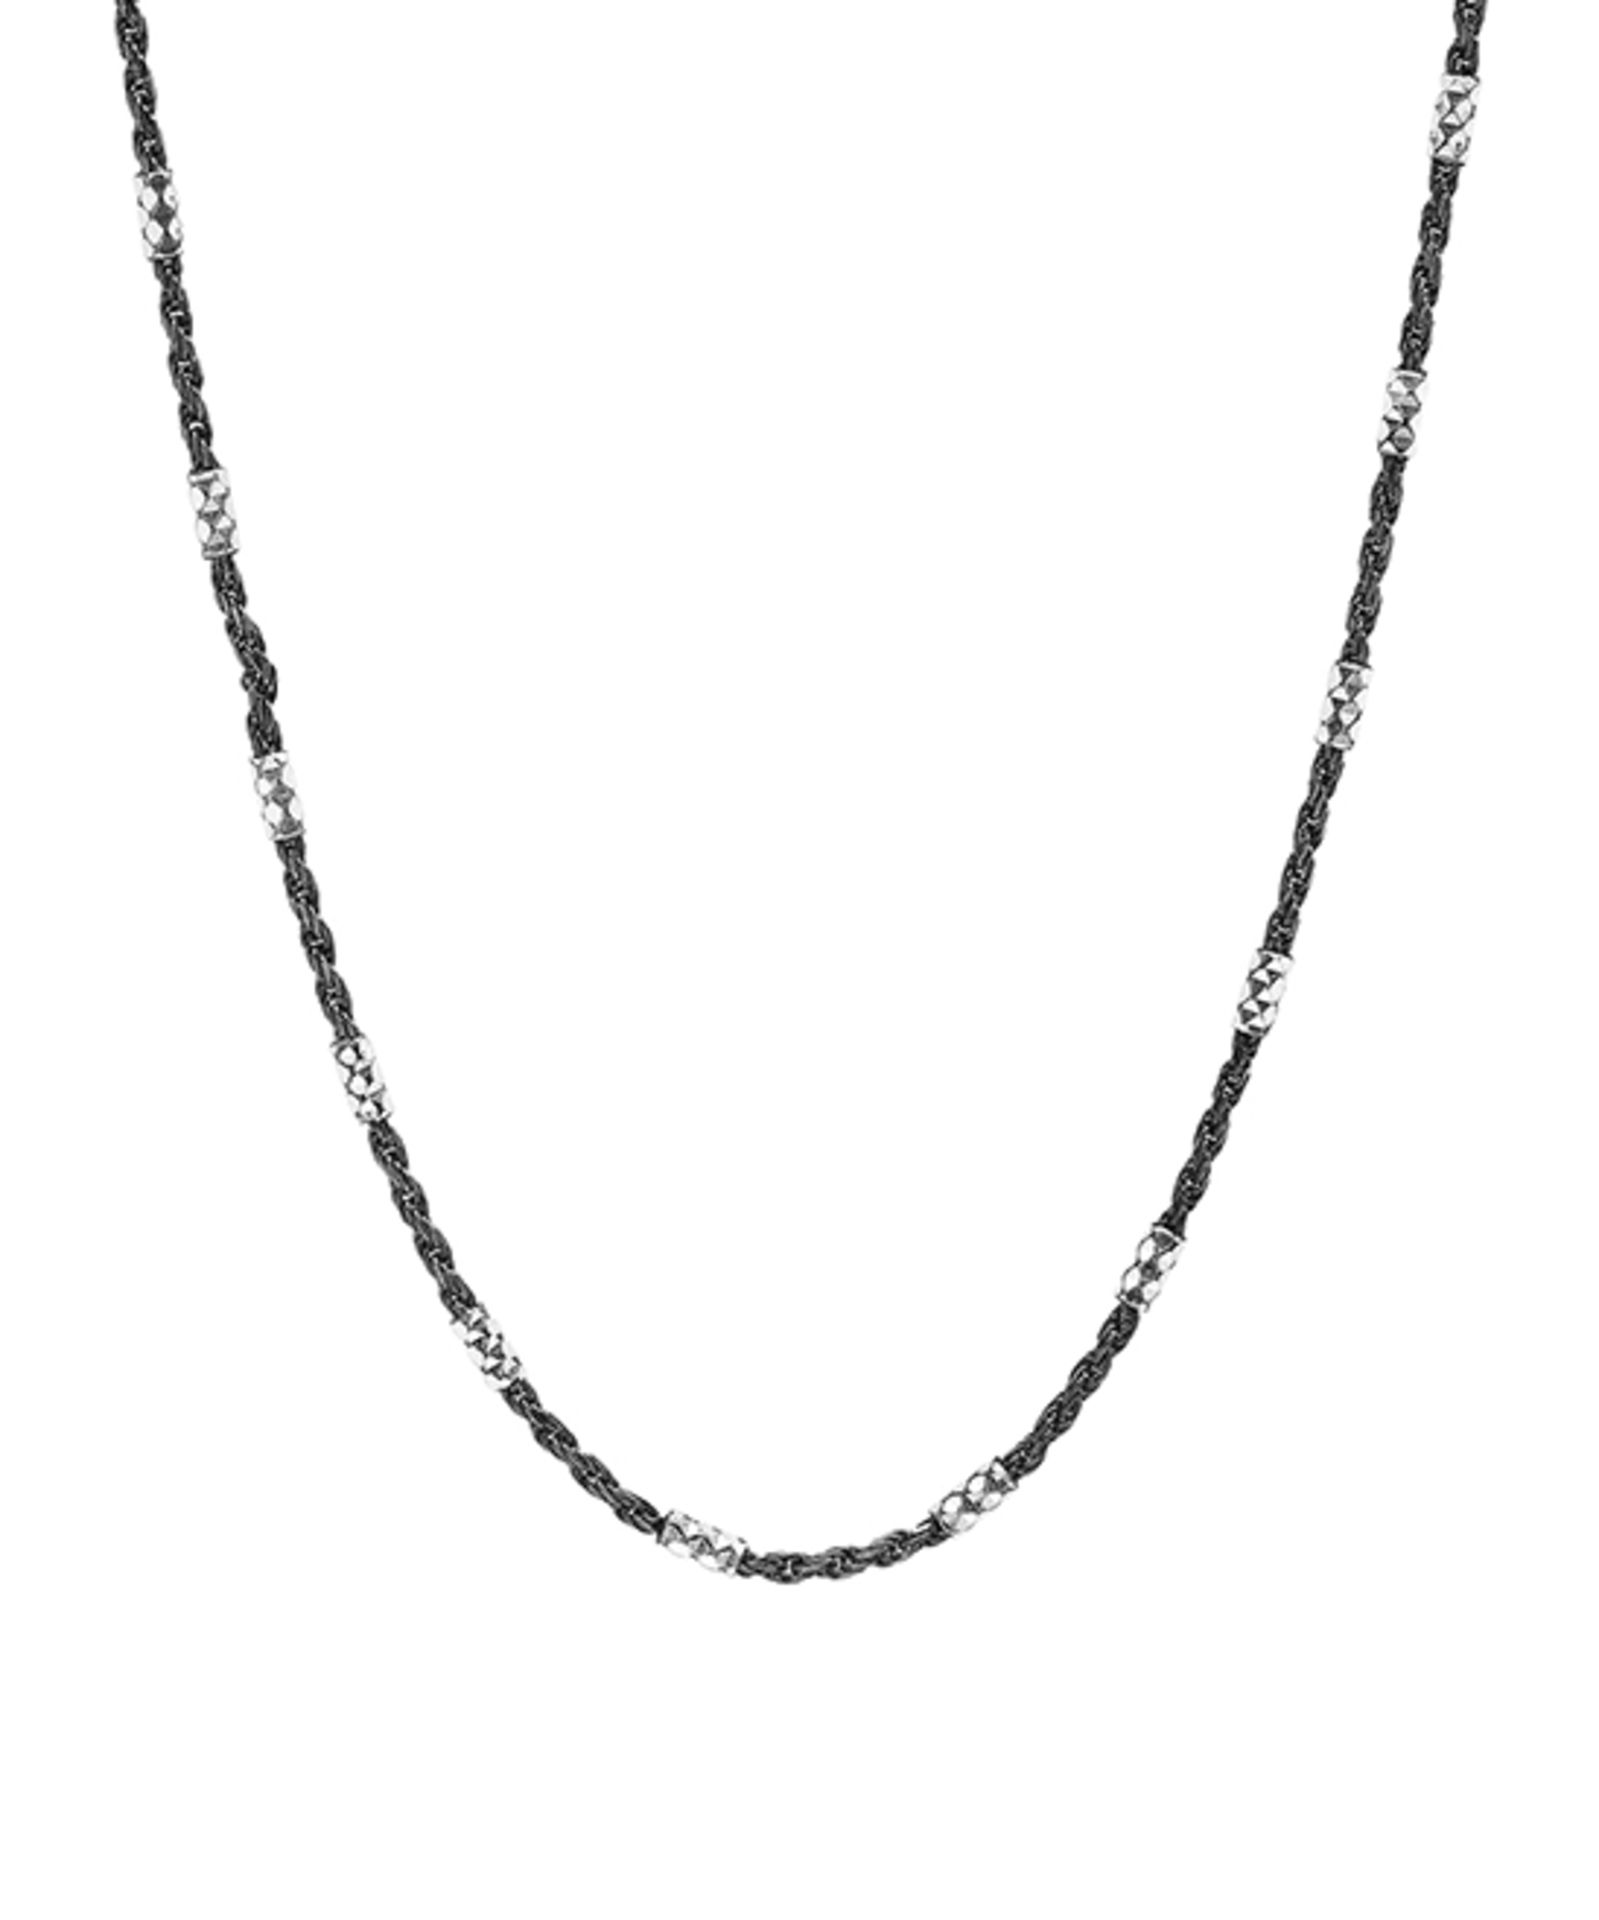 Sevil 925 Two-Tone Sterling Silver Tube Chain (Size: 20") [Ref: 56942341-Box 4]